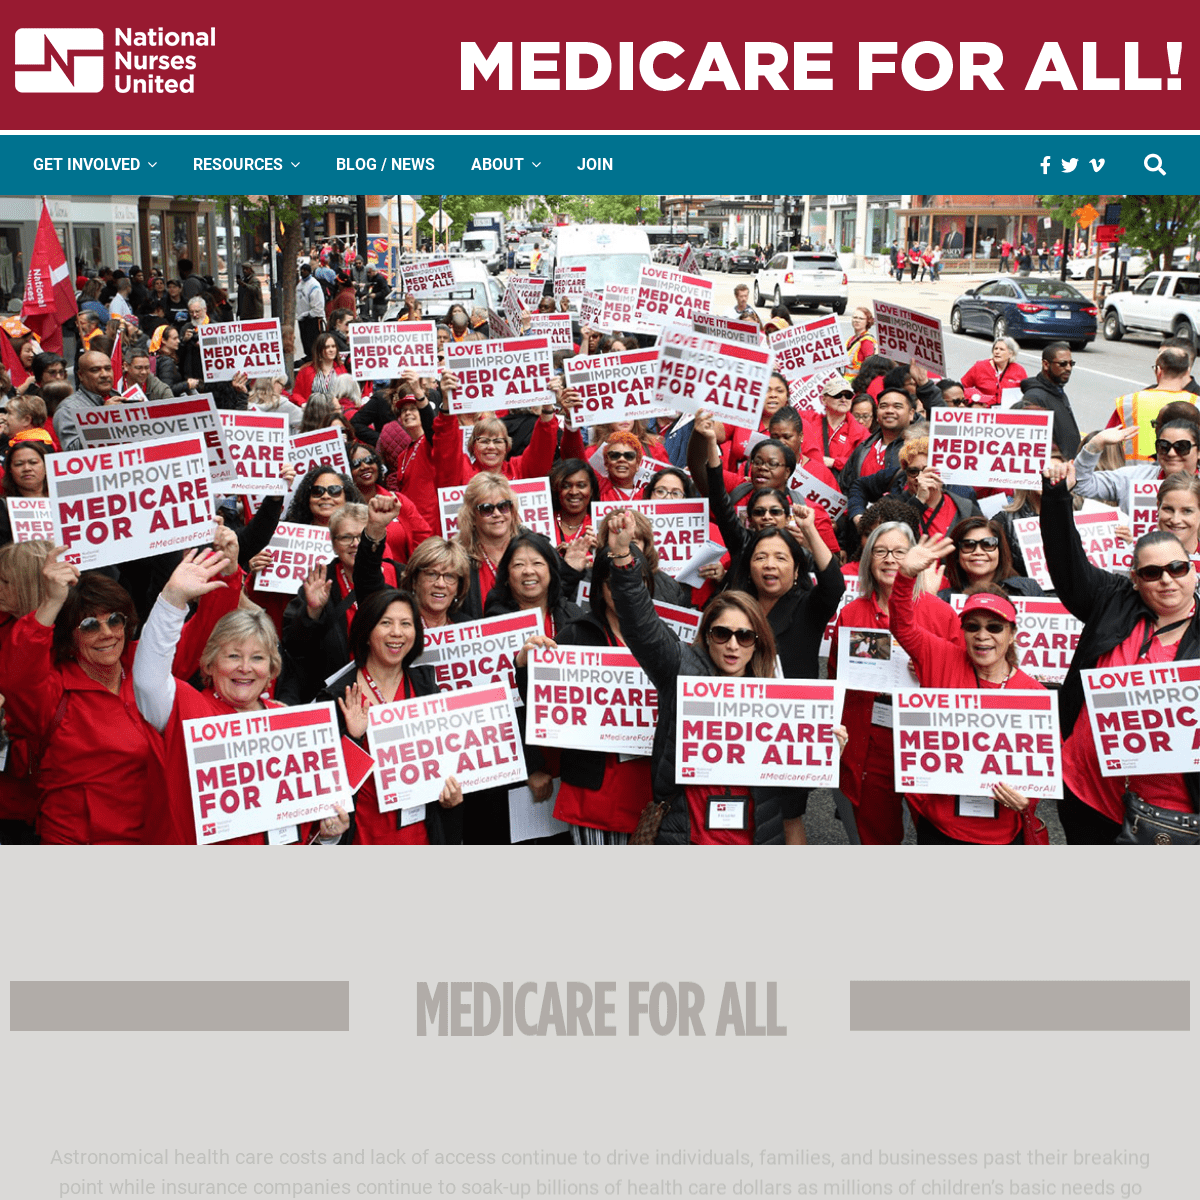 A complete backup of https://medicare4all.org